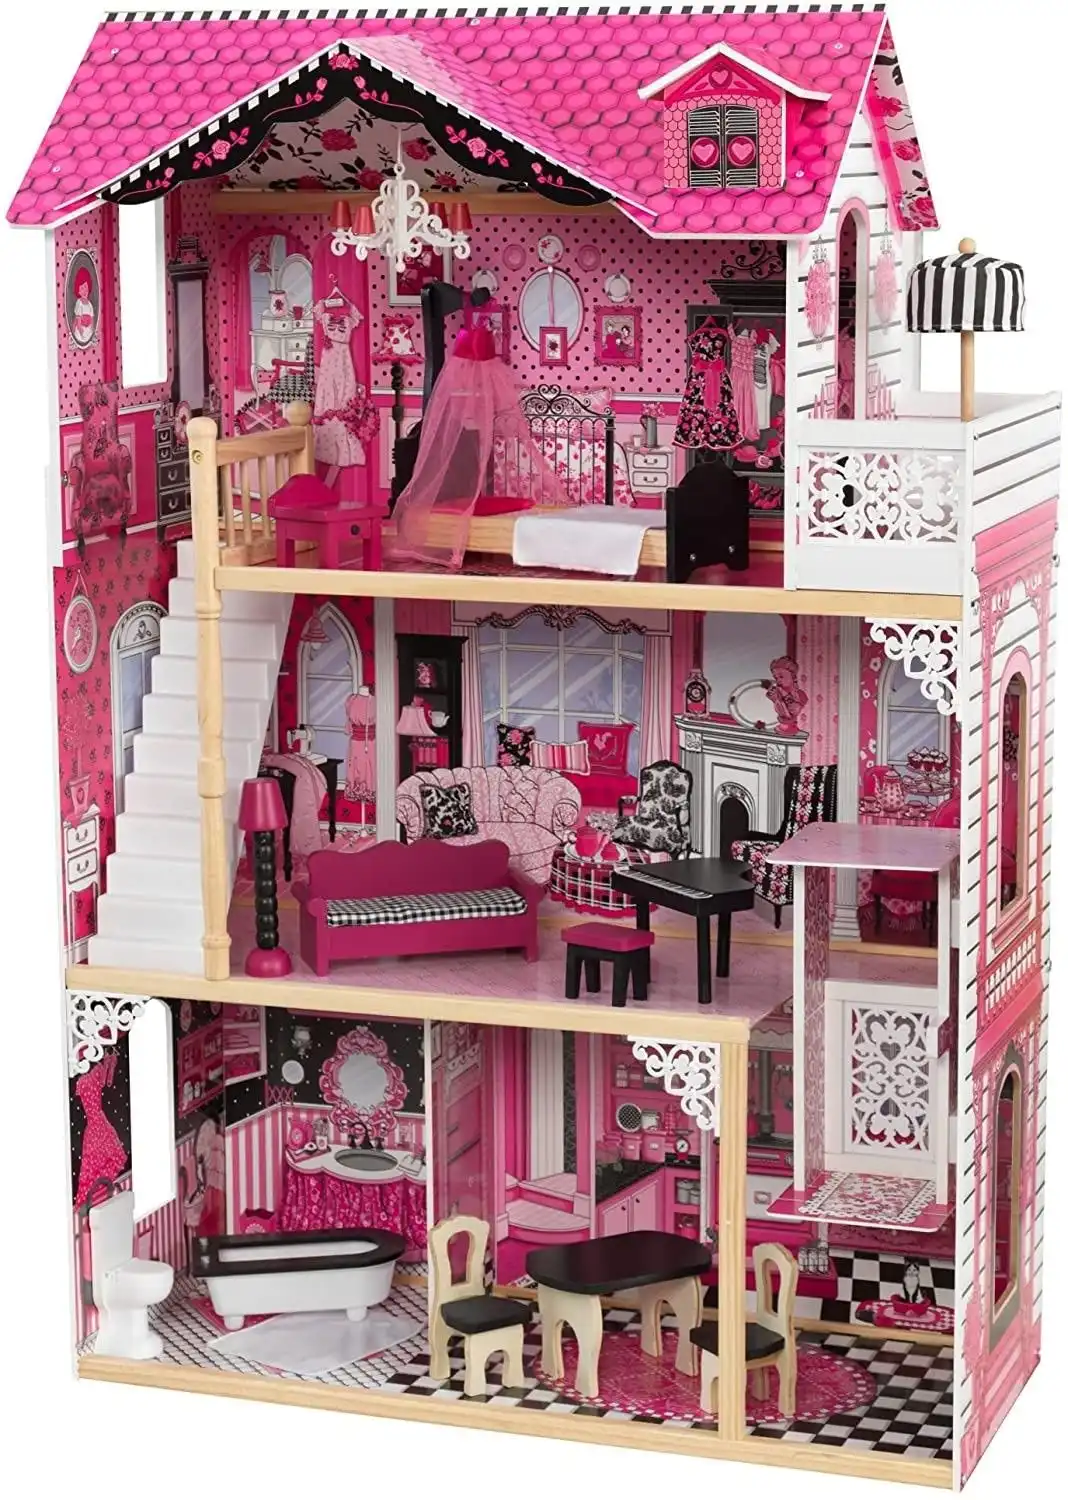 Dollhouse with Furniture for kids 120 x 83 x 40 cm (Model 6)